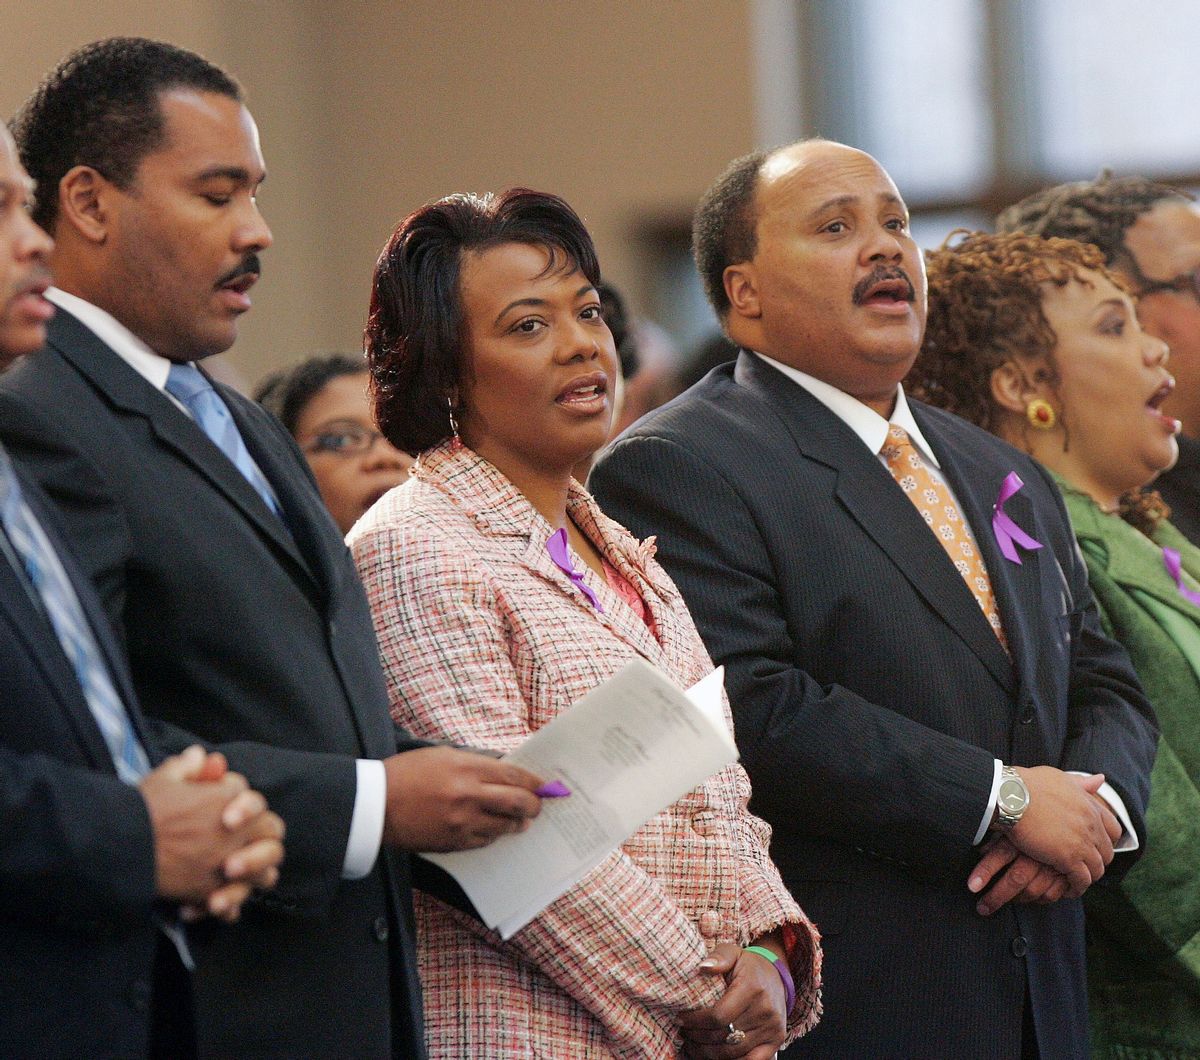 FILE - In this Feb. 6, 2006 file photo, the children of Martin Luther King Jr.,and Coretta Scott King, left to right, Dexter Scott King, Rev. Bernice King, Martin Luther King III and Yolanda King participate in a musical tribute to their mother at the new Ebenezer Baptist Church  in Atlanta Monday, Feb. 6, 2006.  A judge in Atlanta is set to hear motions Tuesday, Jan. 13, 2015, in the legal dispute that pits Martin Luther King Jr.s two sons against his daughter Bernice in a dispute over two of his most cherished items. (AP Photo/John Bazemore, File) (AP)